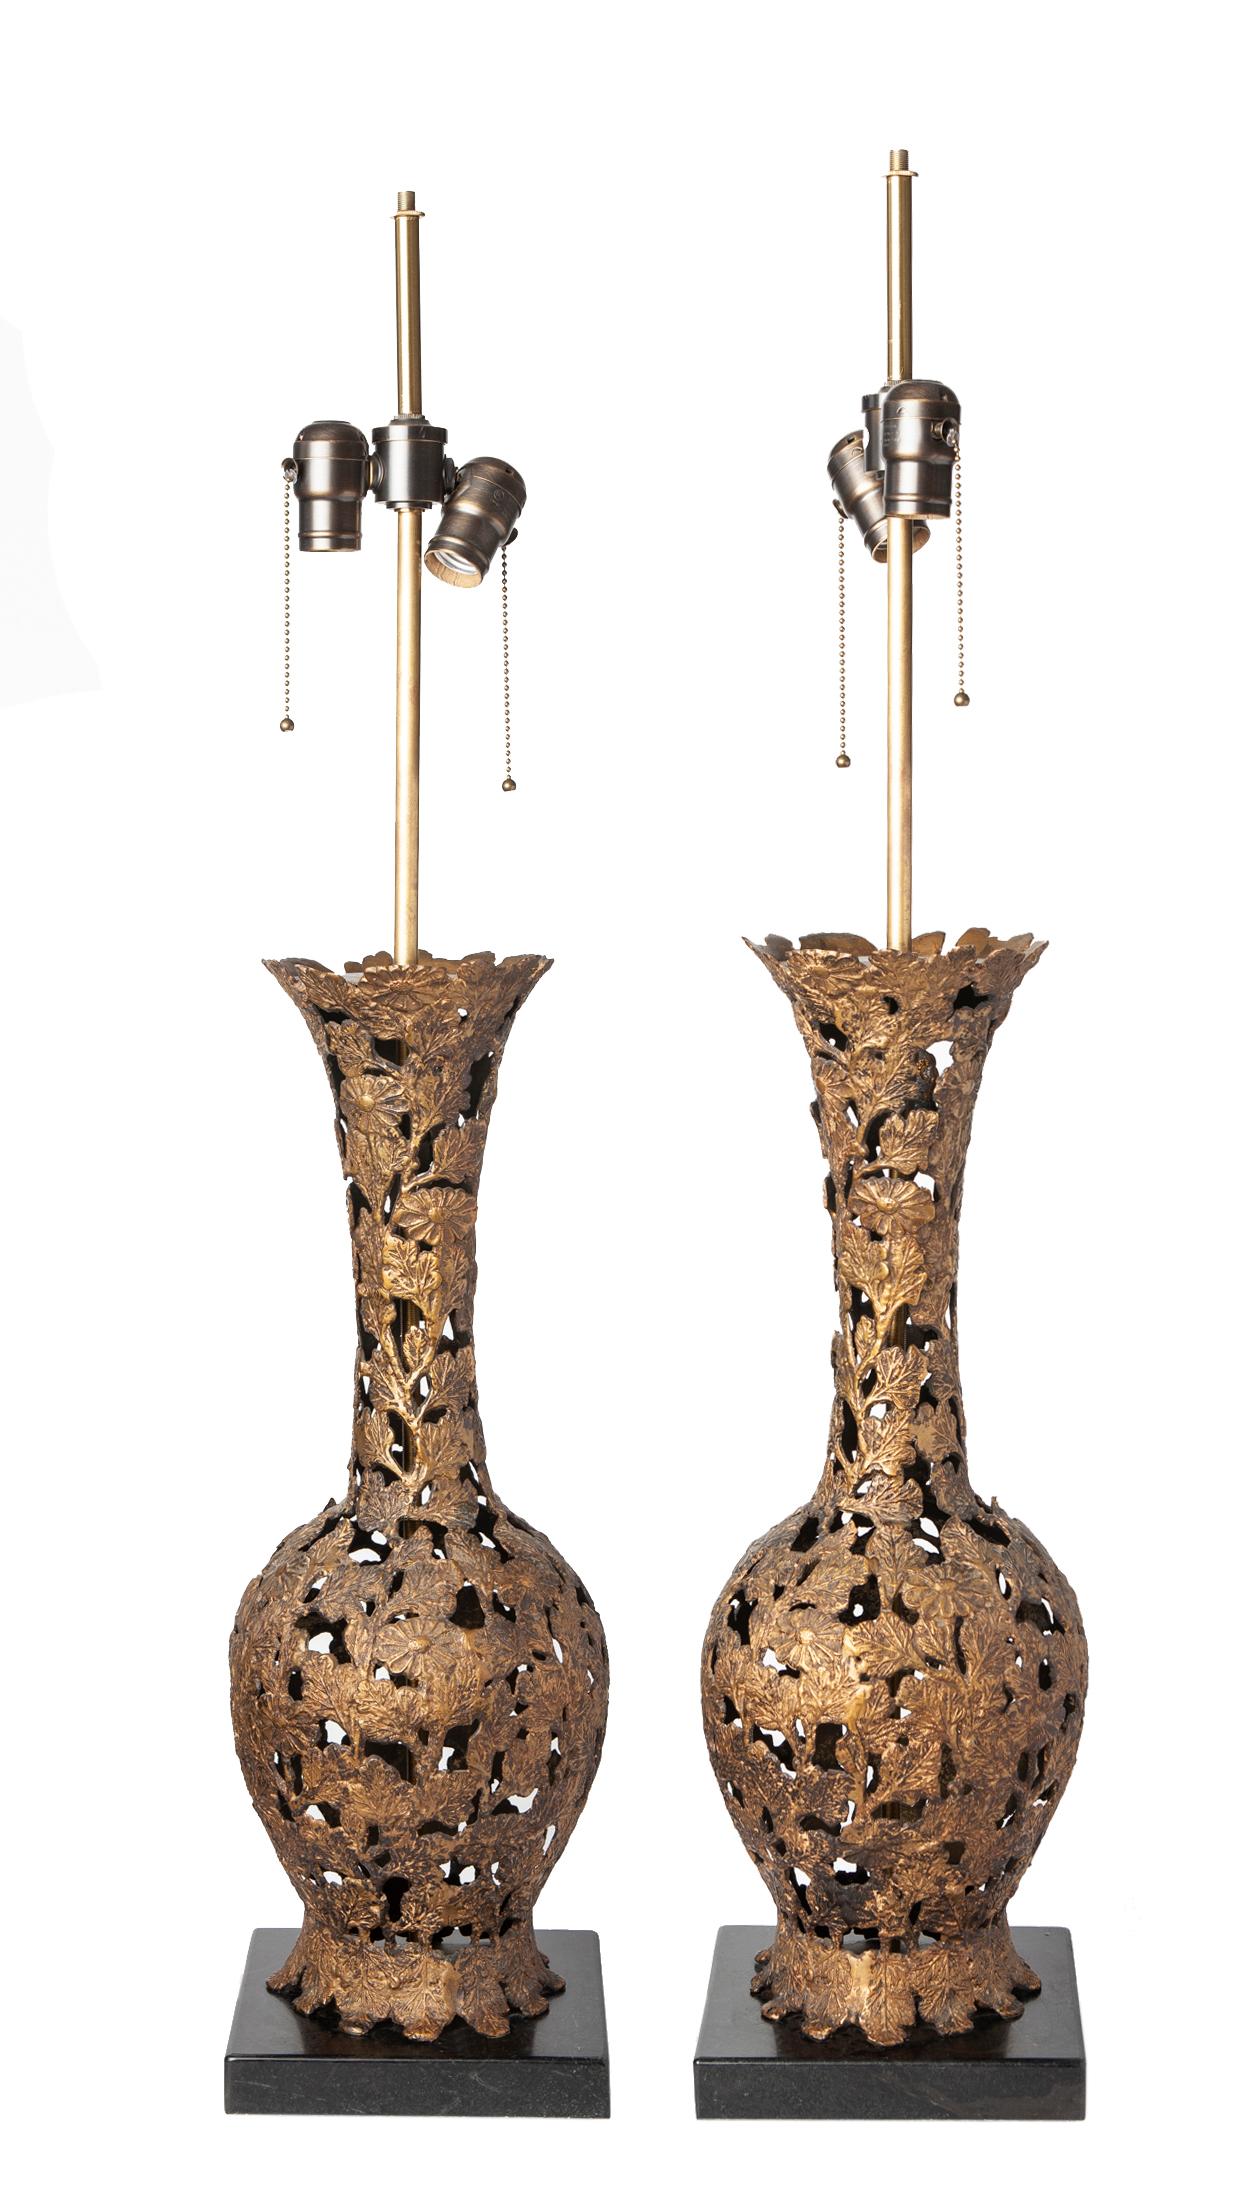 Japanese bronze lamps with reticulated vase with a flower & leaf and braanch pattern. Mounted on custom made  soapstone base. 23